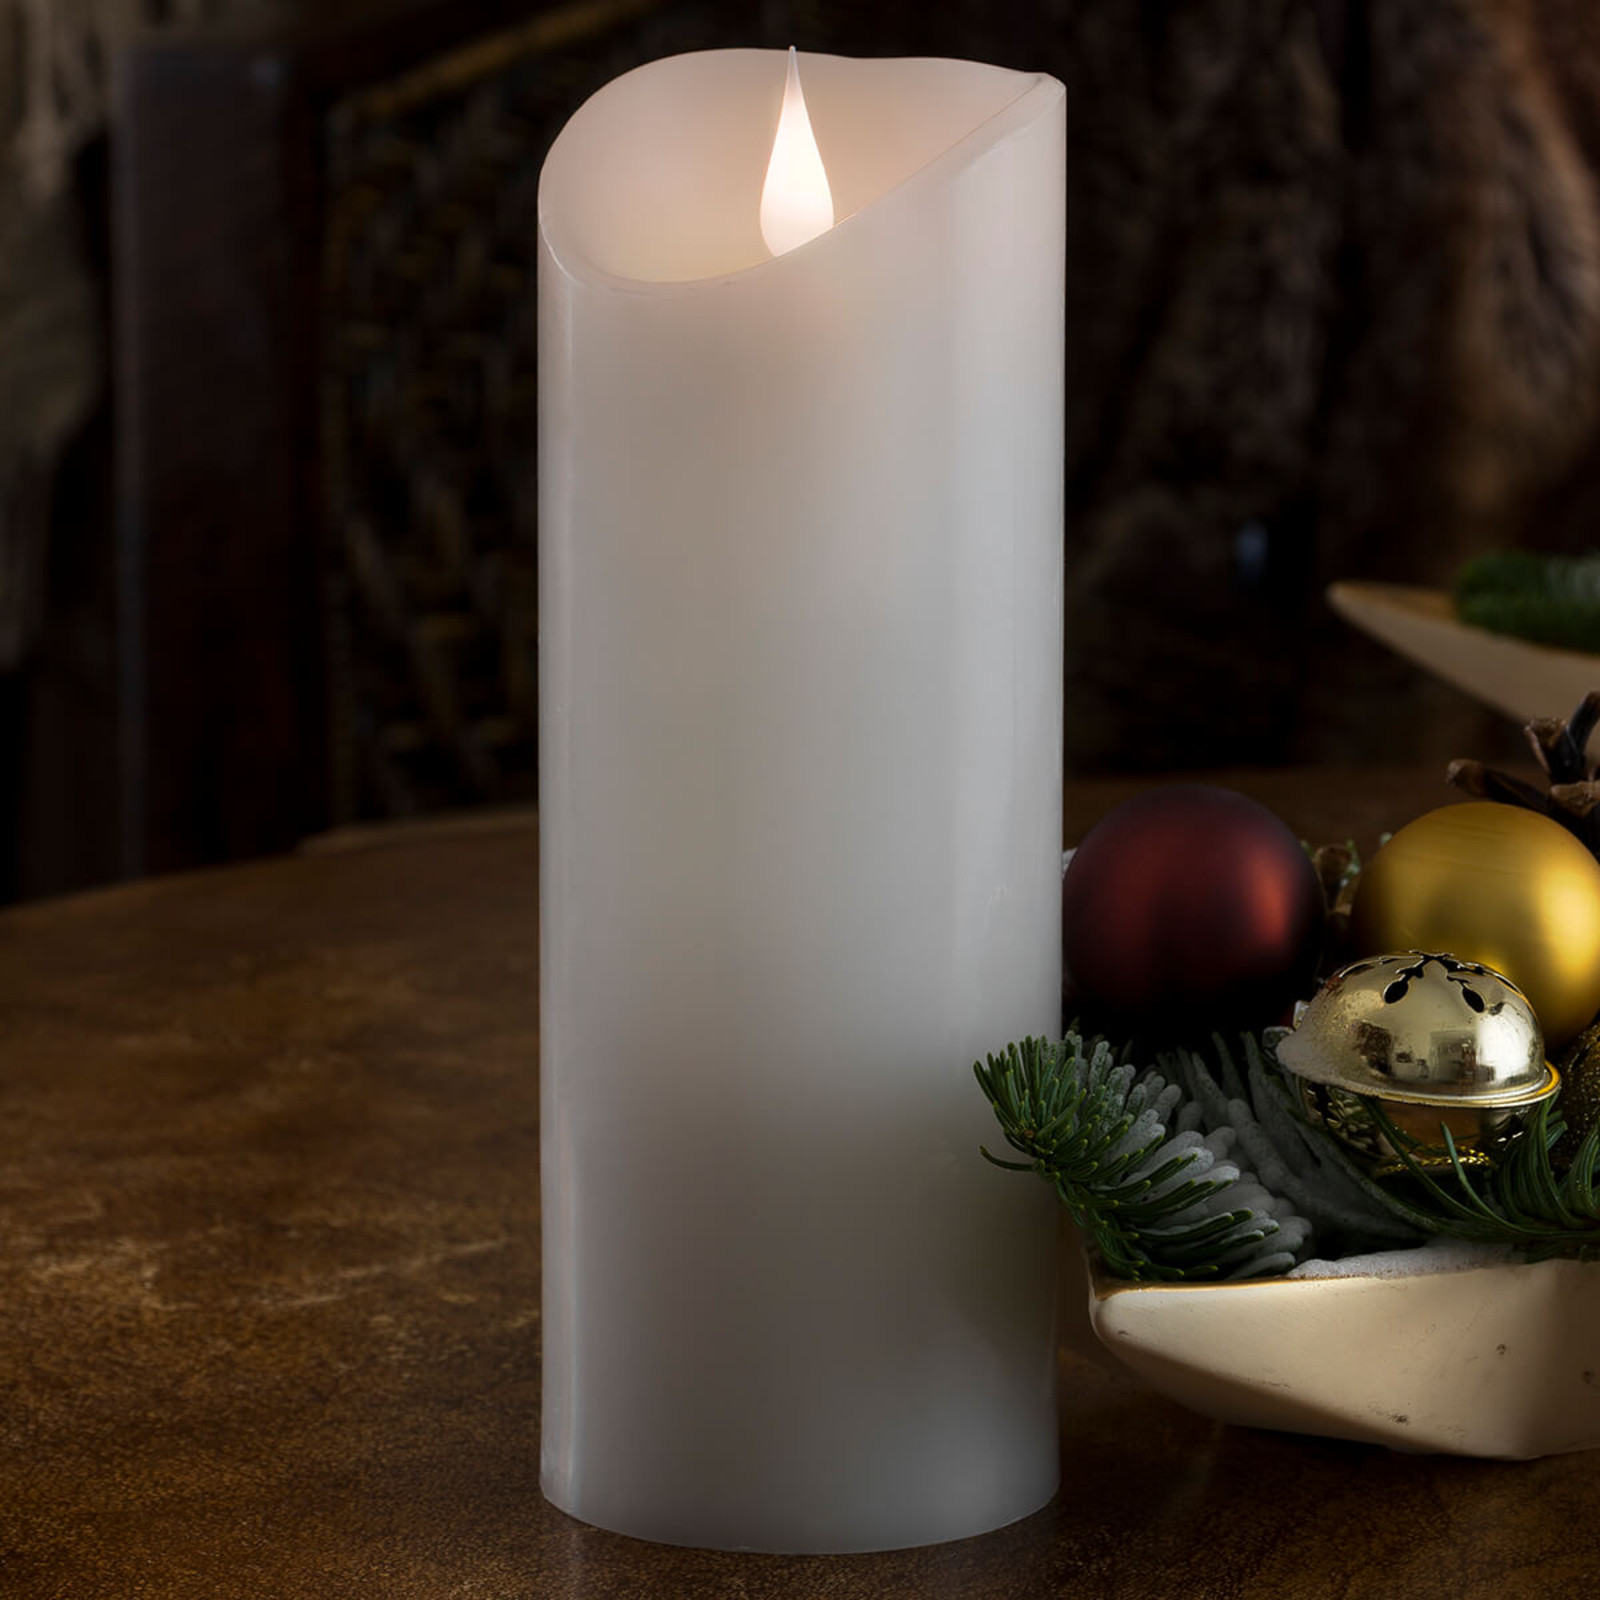 Features a 3D flame - LED real wax candle